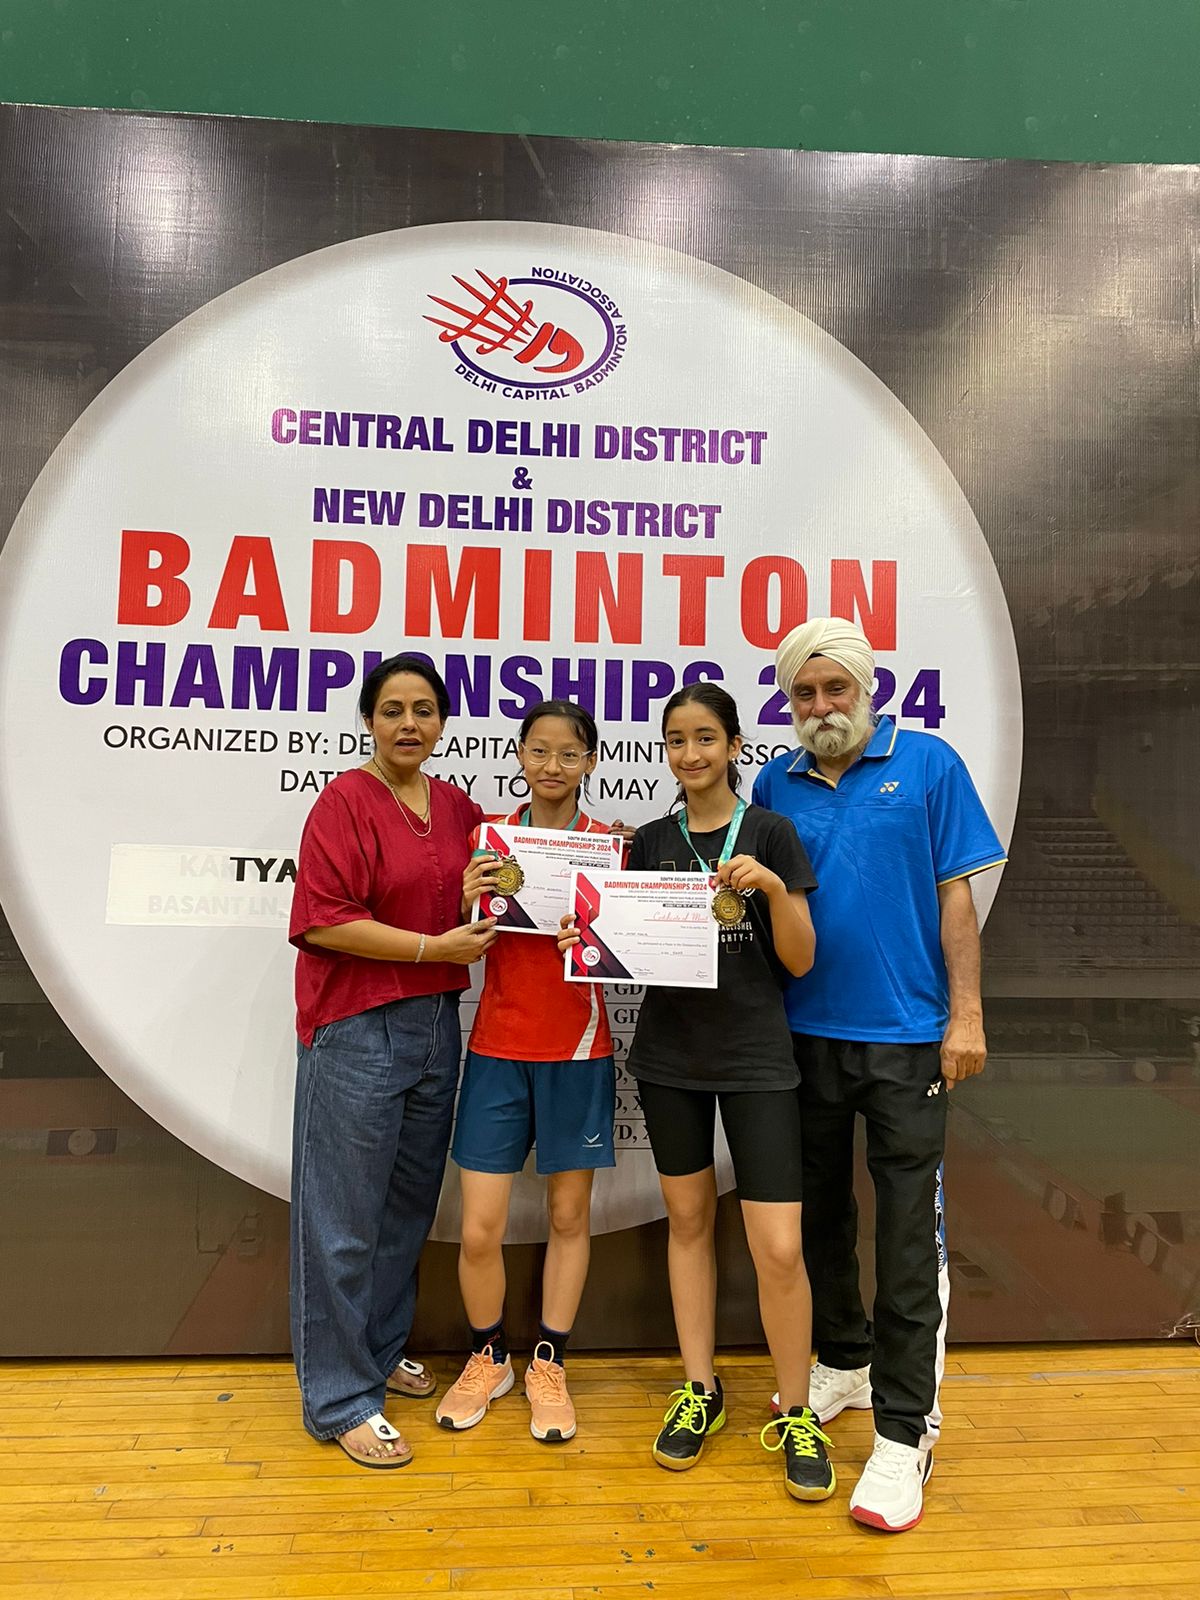 South Delhi District Badminton Championship 2024, organised by the Delhi Capital Badminton Association, from 1 to 4 May 2024 ...Click here to read more